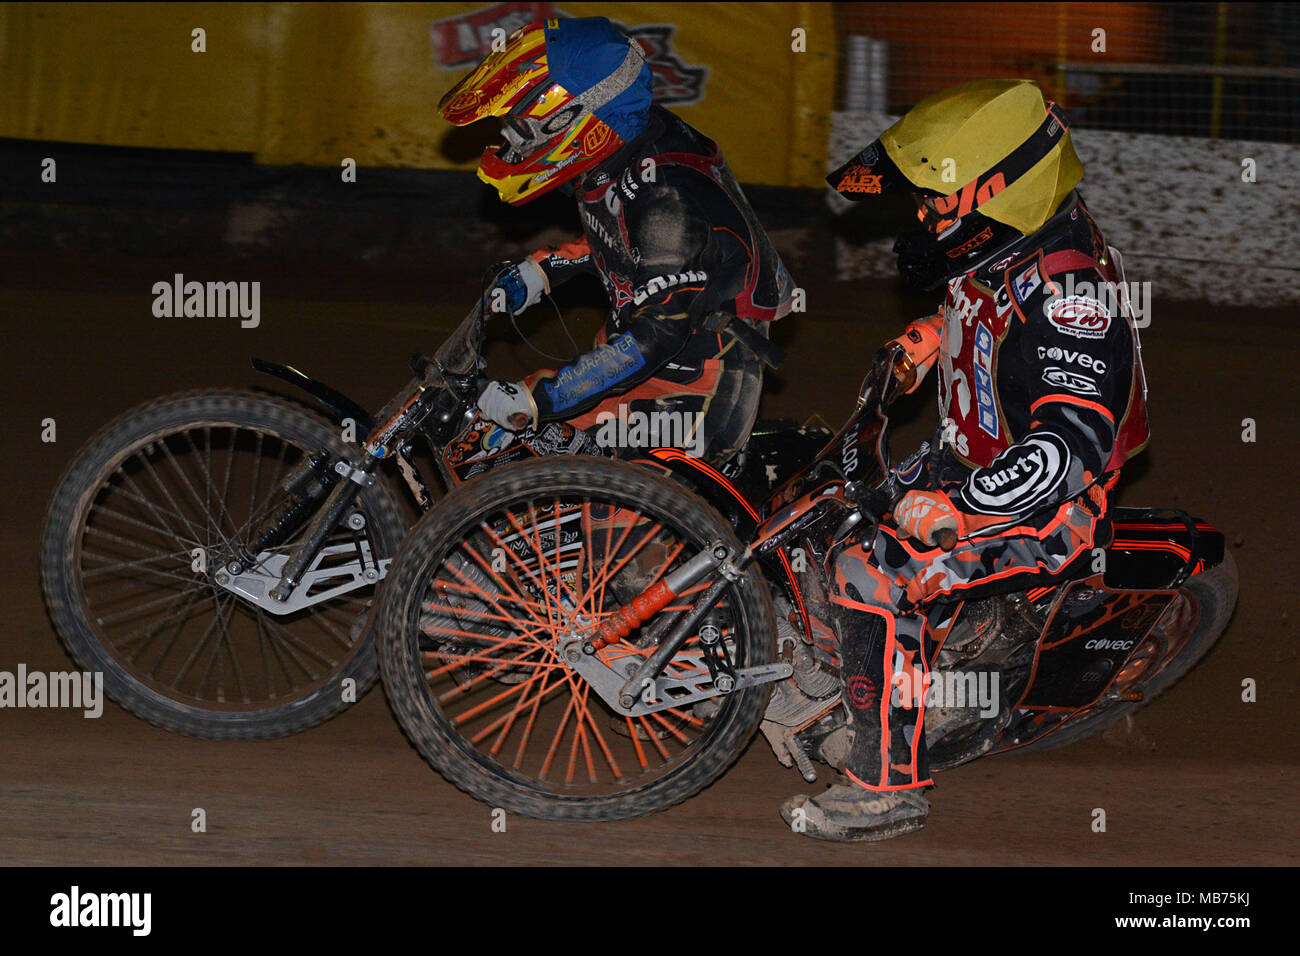 Plymouth, UK. 6th April, 2018. Plymouth Devils Macauley Leek and Kent Kings Alex Spooner in close company during heat 12 of the National Trophy meeting between the two teams. Nick Truscott Photography Ltd Credit: Nicholas Truscott/Alamy Live News Stock Photo